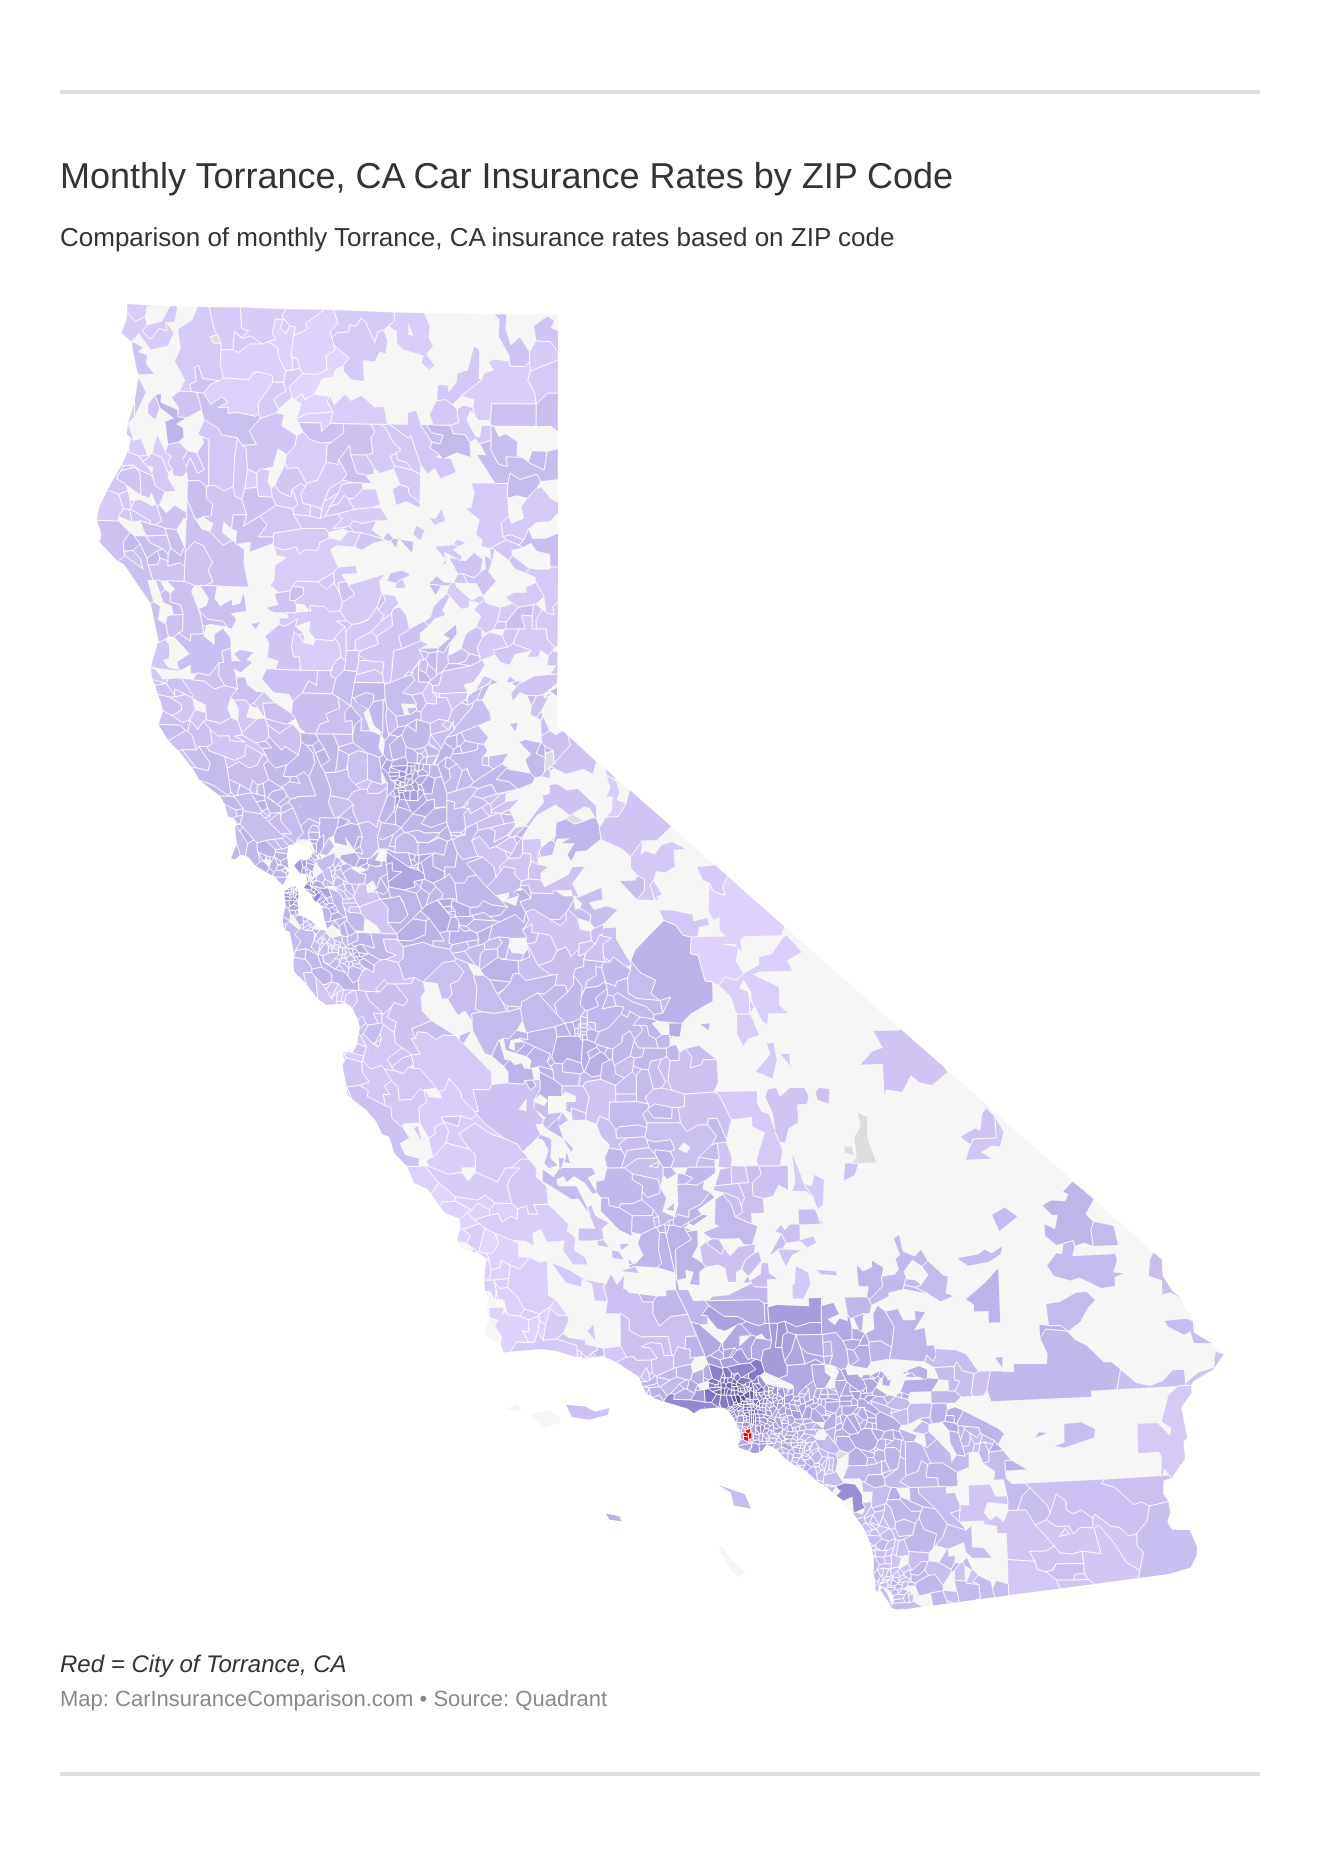 Monthly Torrance, CA Car Insurance Rates by ZIP Code